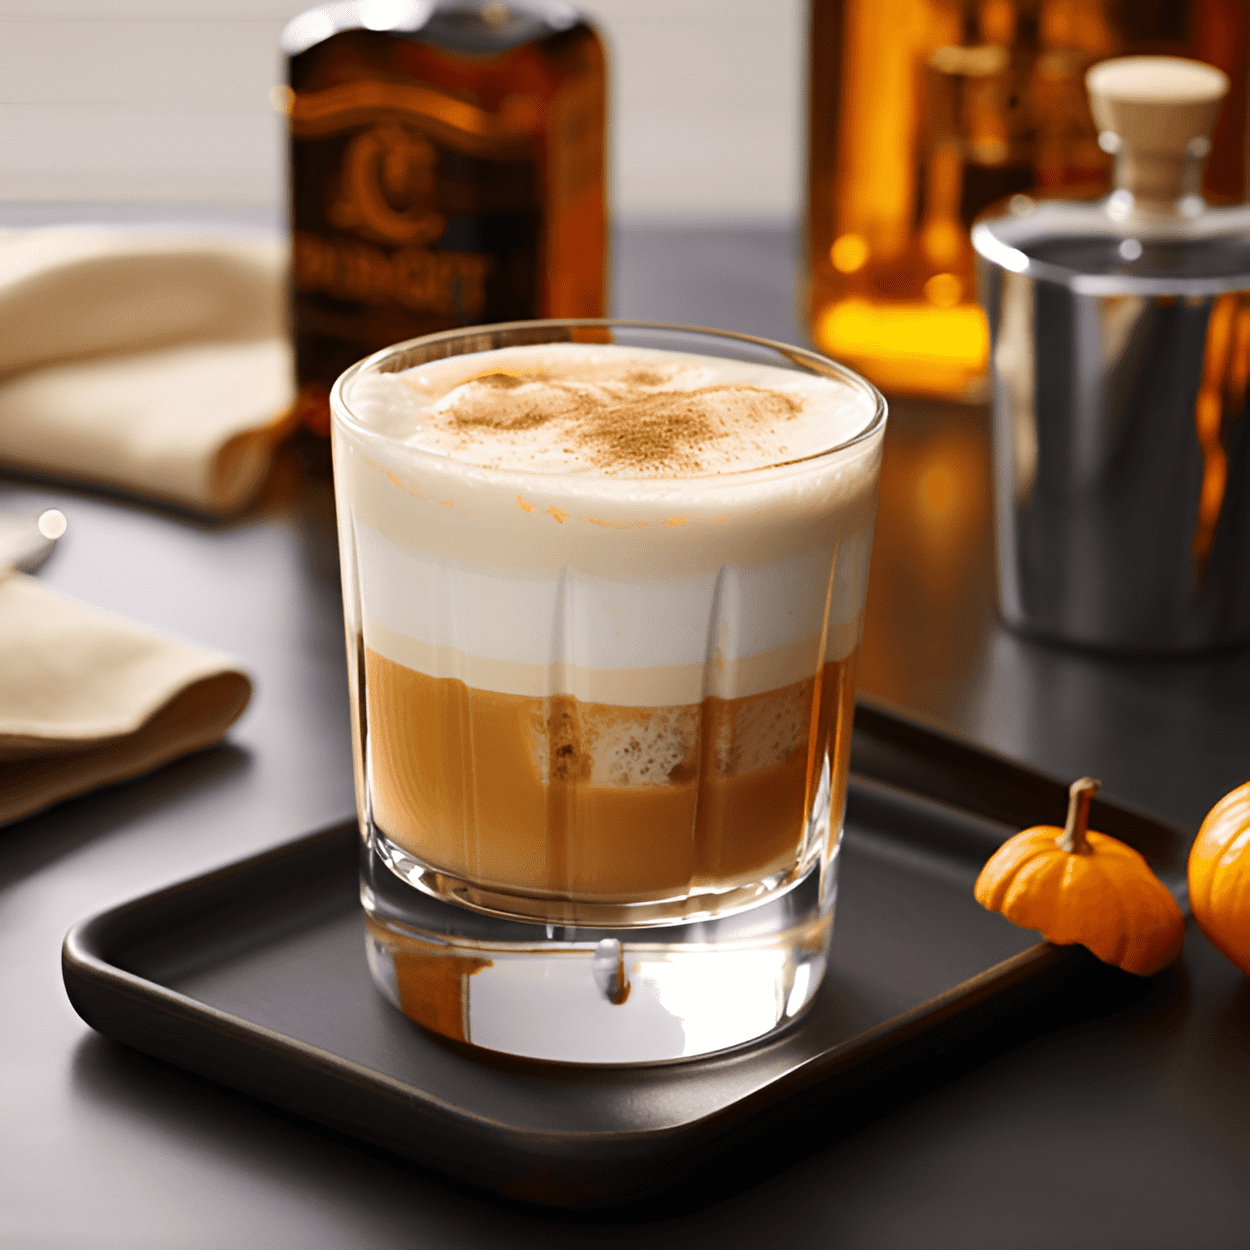 Pumpkin Spice White Russian Cocktail Recipe - The Pumpkin Spice White Russian is creamy, sweet, and slightly spicy. The vodka provides a strong base, the coffee liqueur adds depth and sweetness, and the pumpkin spice creamer gives it a warm, spicy kick.